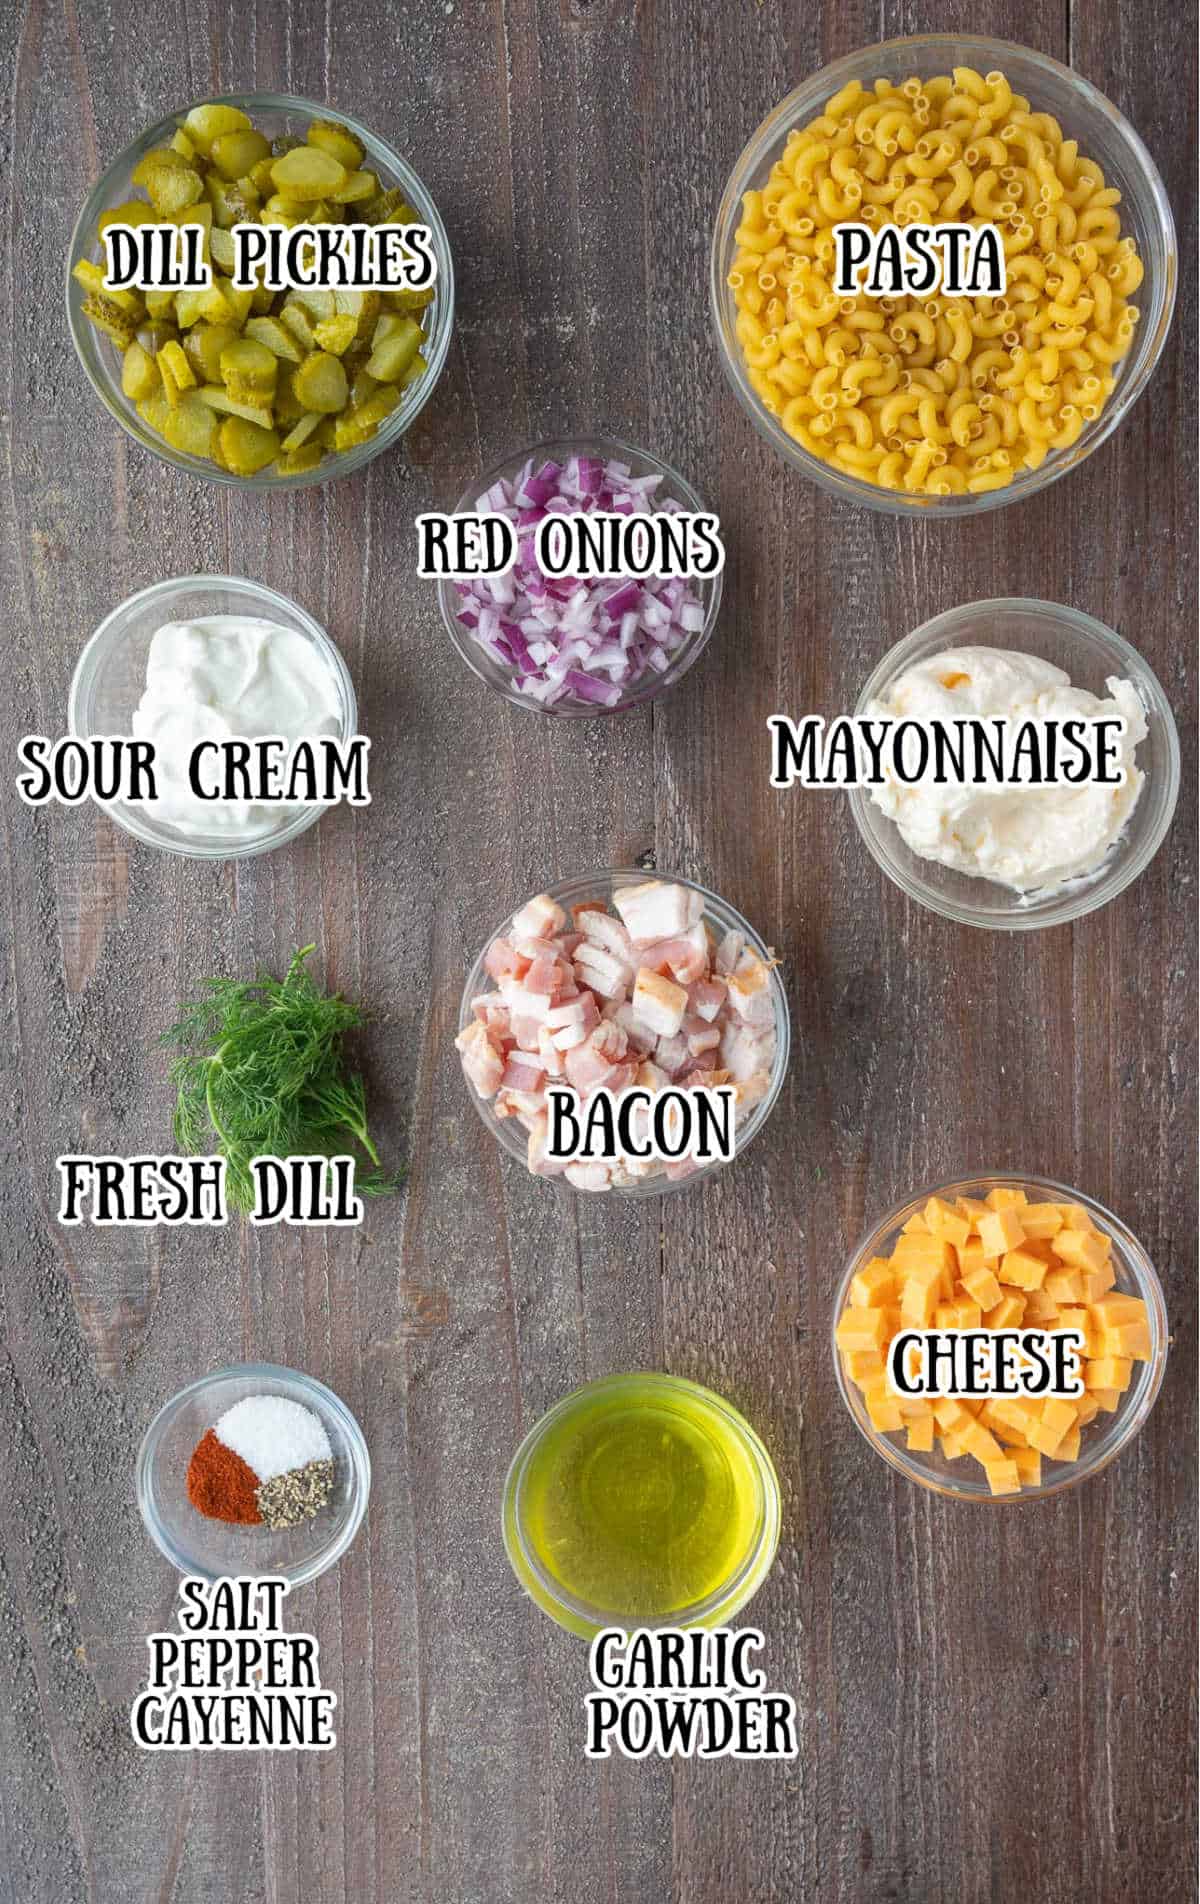 All of the ingredients needed for this pasta salad.